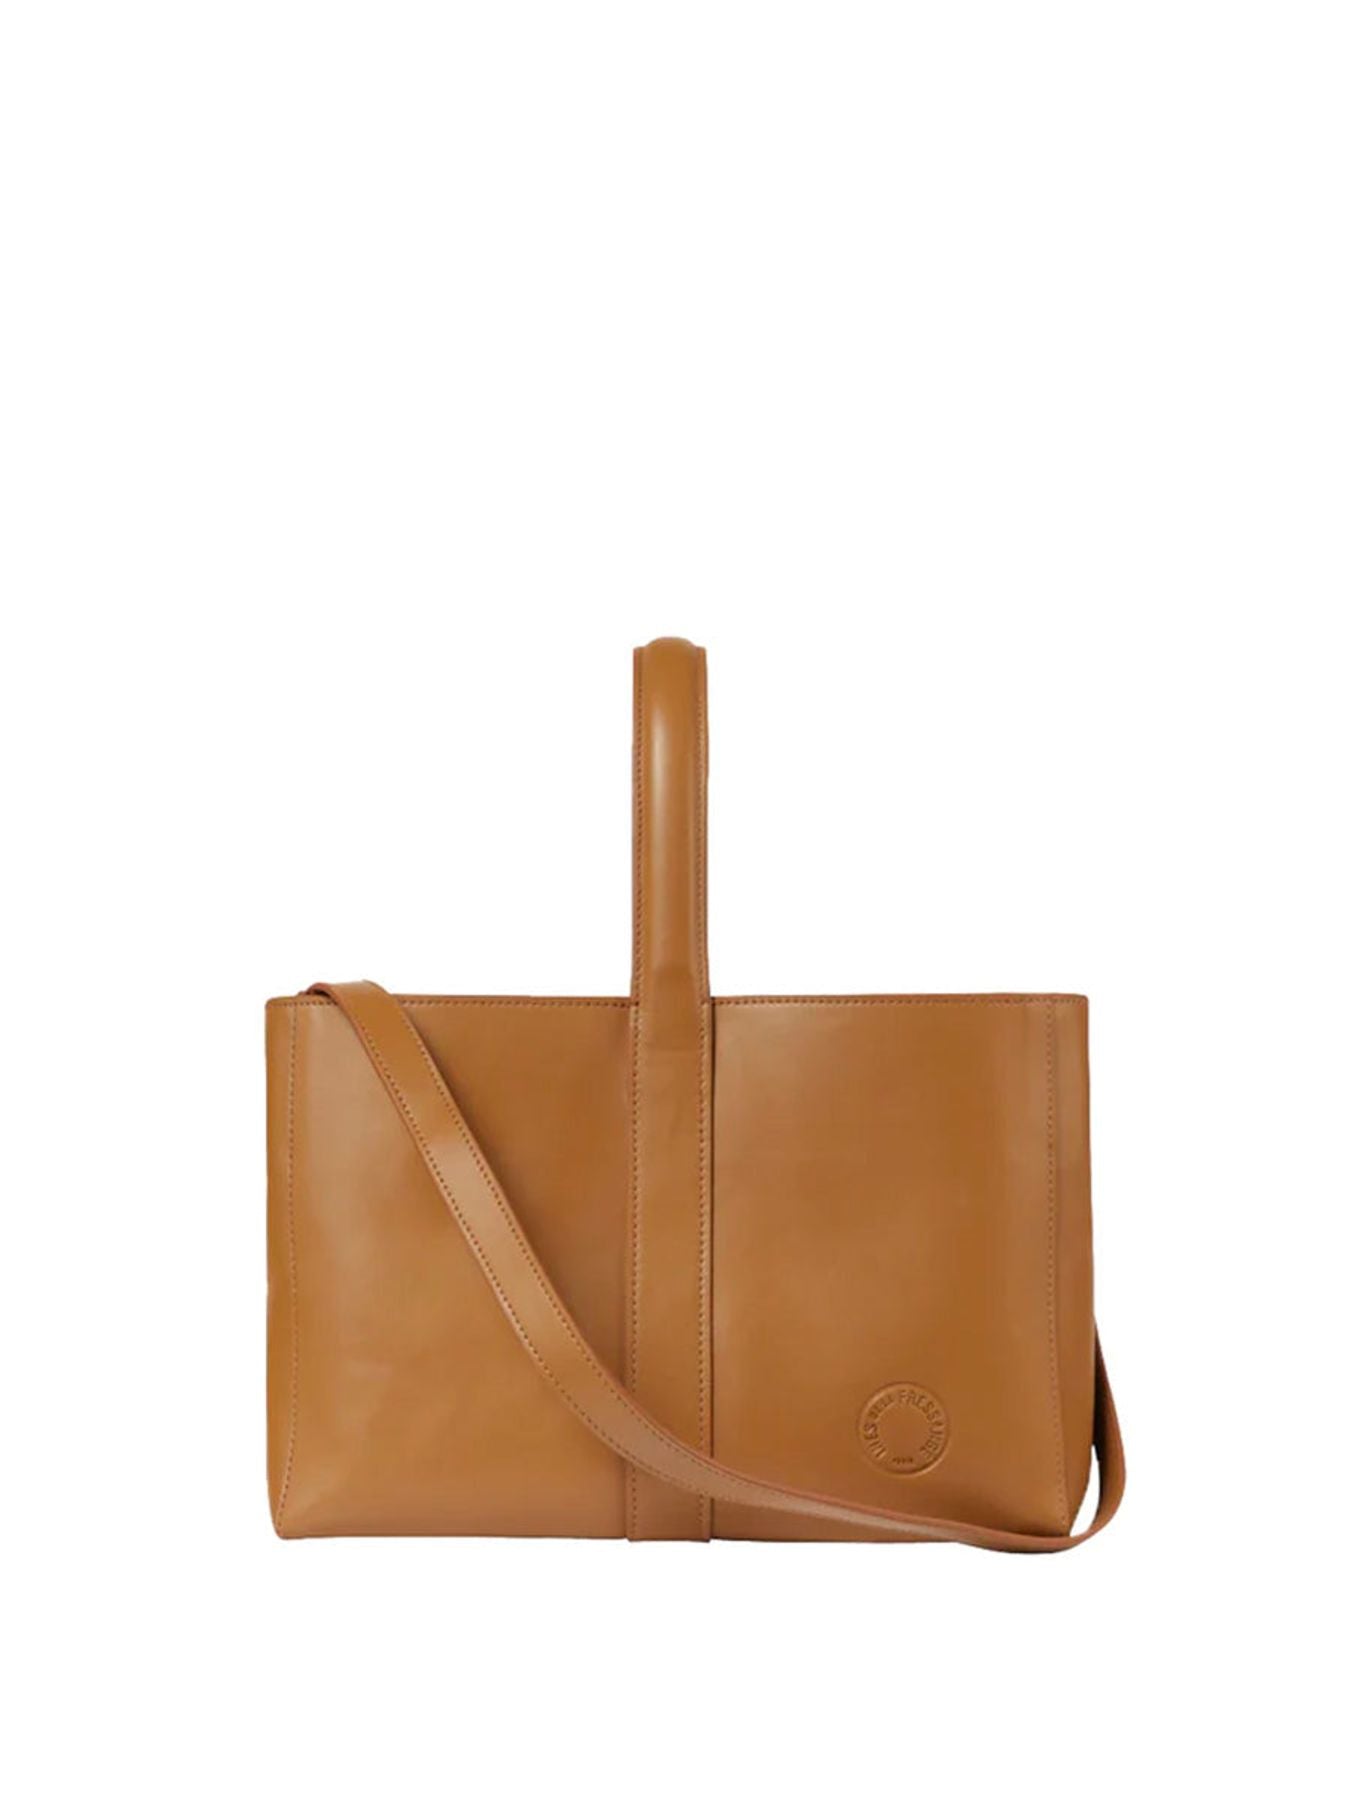 bag-leonore-size-in-camel-leather